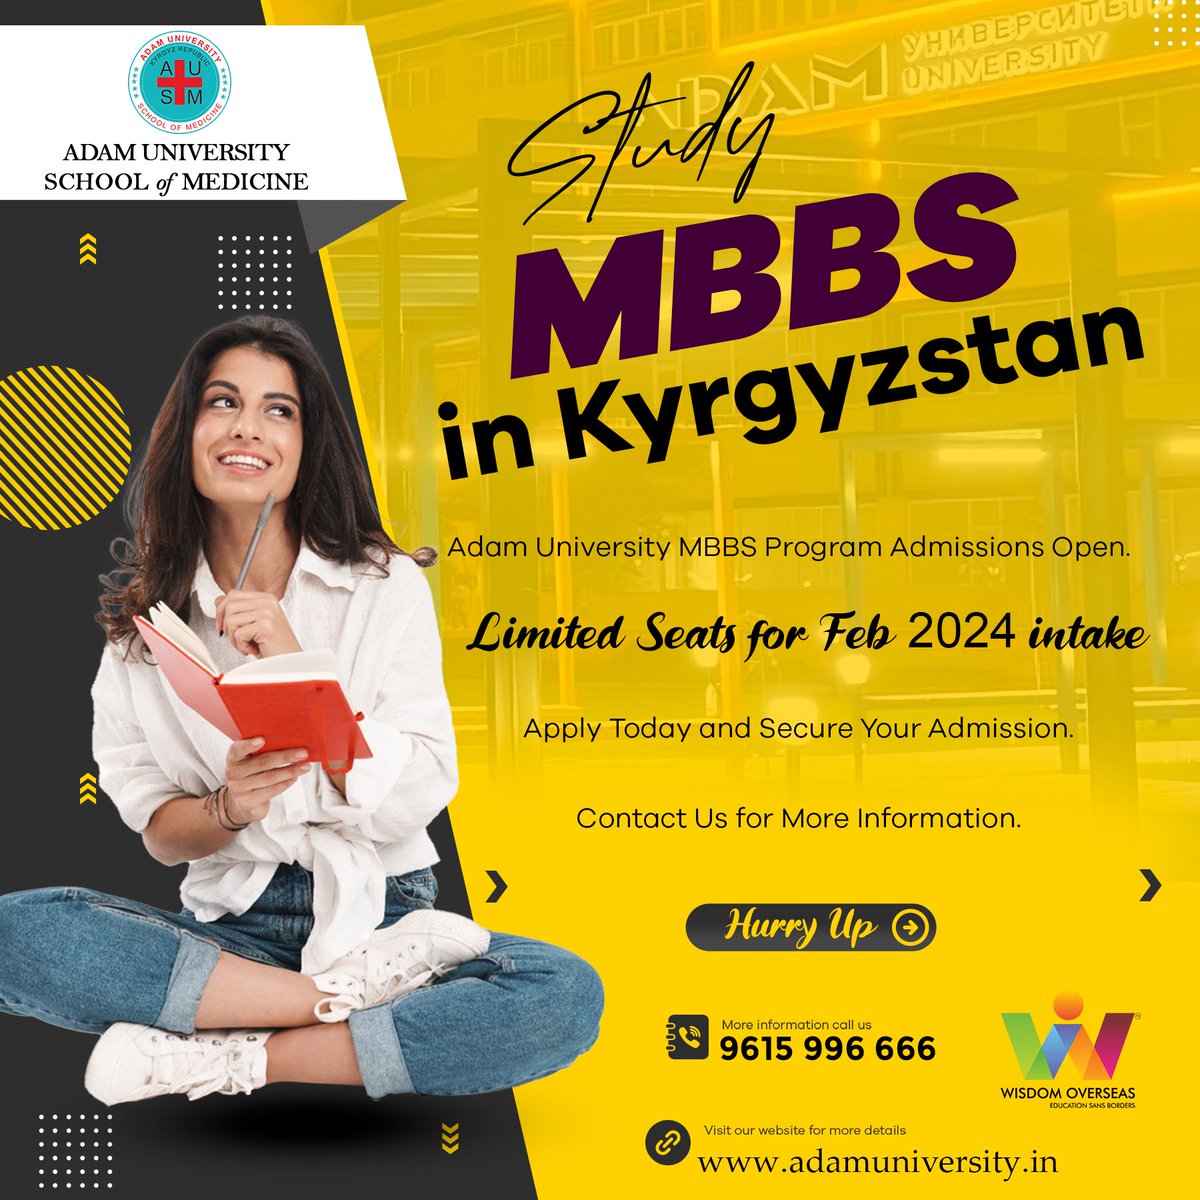 Begin Your MBBS Journey at Adam University, Kyrgyzstan!
Seats for the February 2024 Contact us at 9615 996 666 
VISIT:wisdomoverseas.com
Subscribe Link: bit.ly/375P22M
#MBBSAbroad #AdamUniversity #MedicalDreams #StudyMBBS #mbbsadmission #Kyrgyzstan #WisdomOverseas